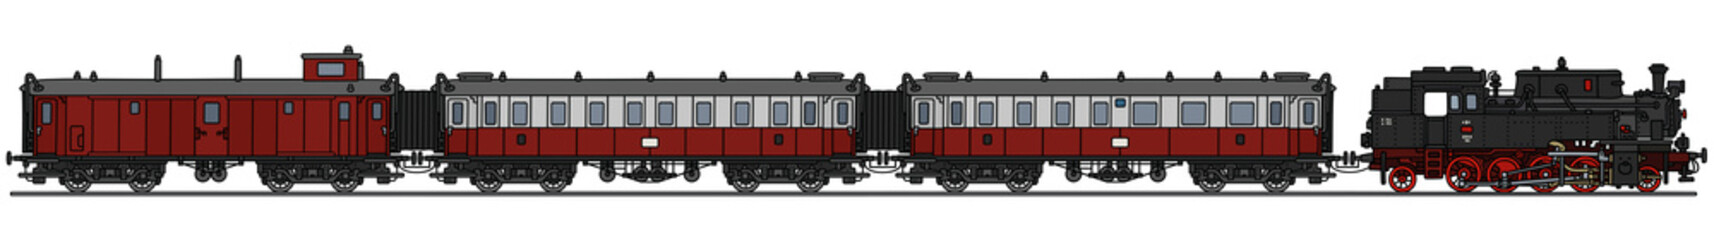 Hand drawing of a classic red steam train